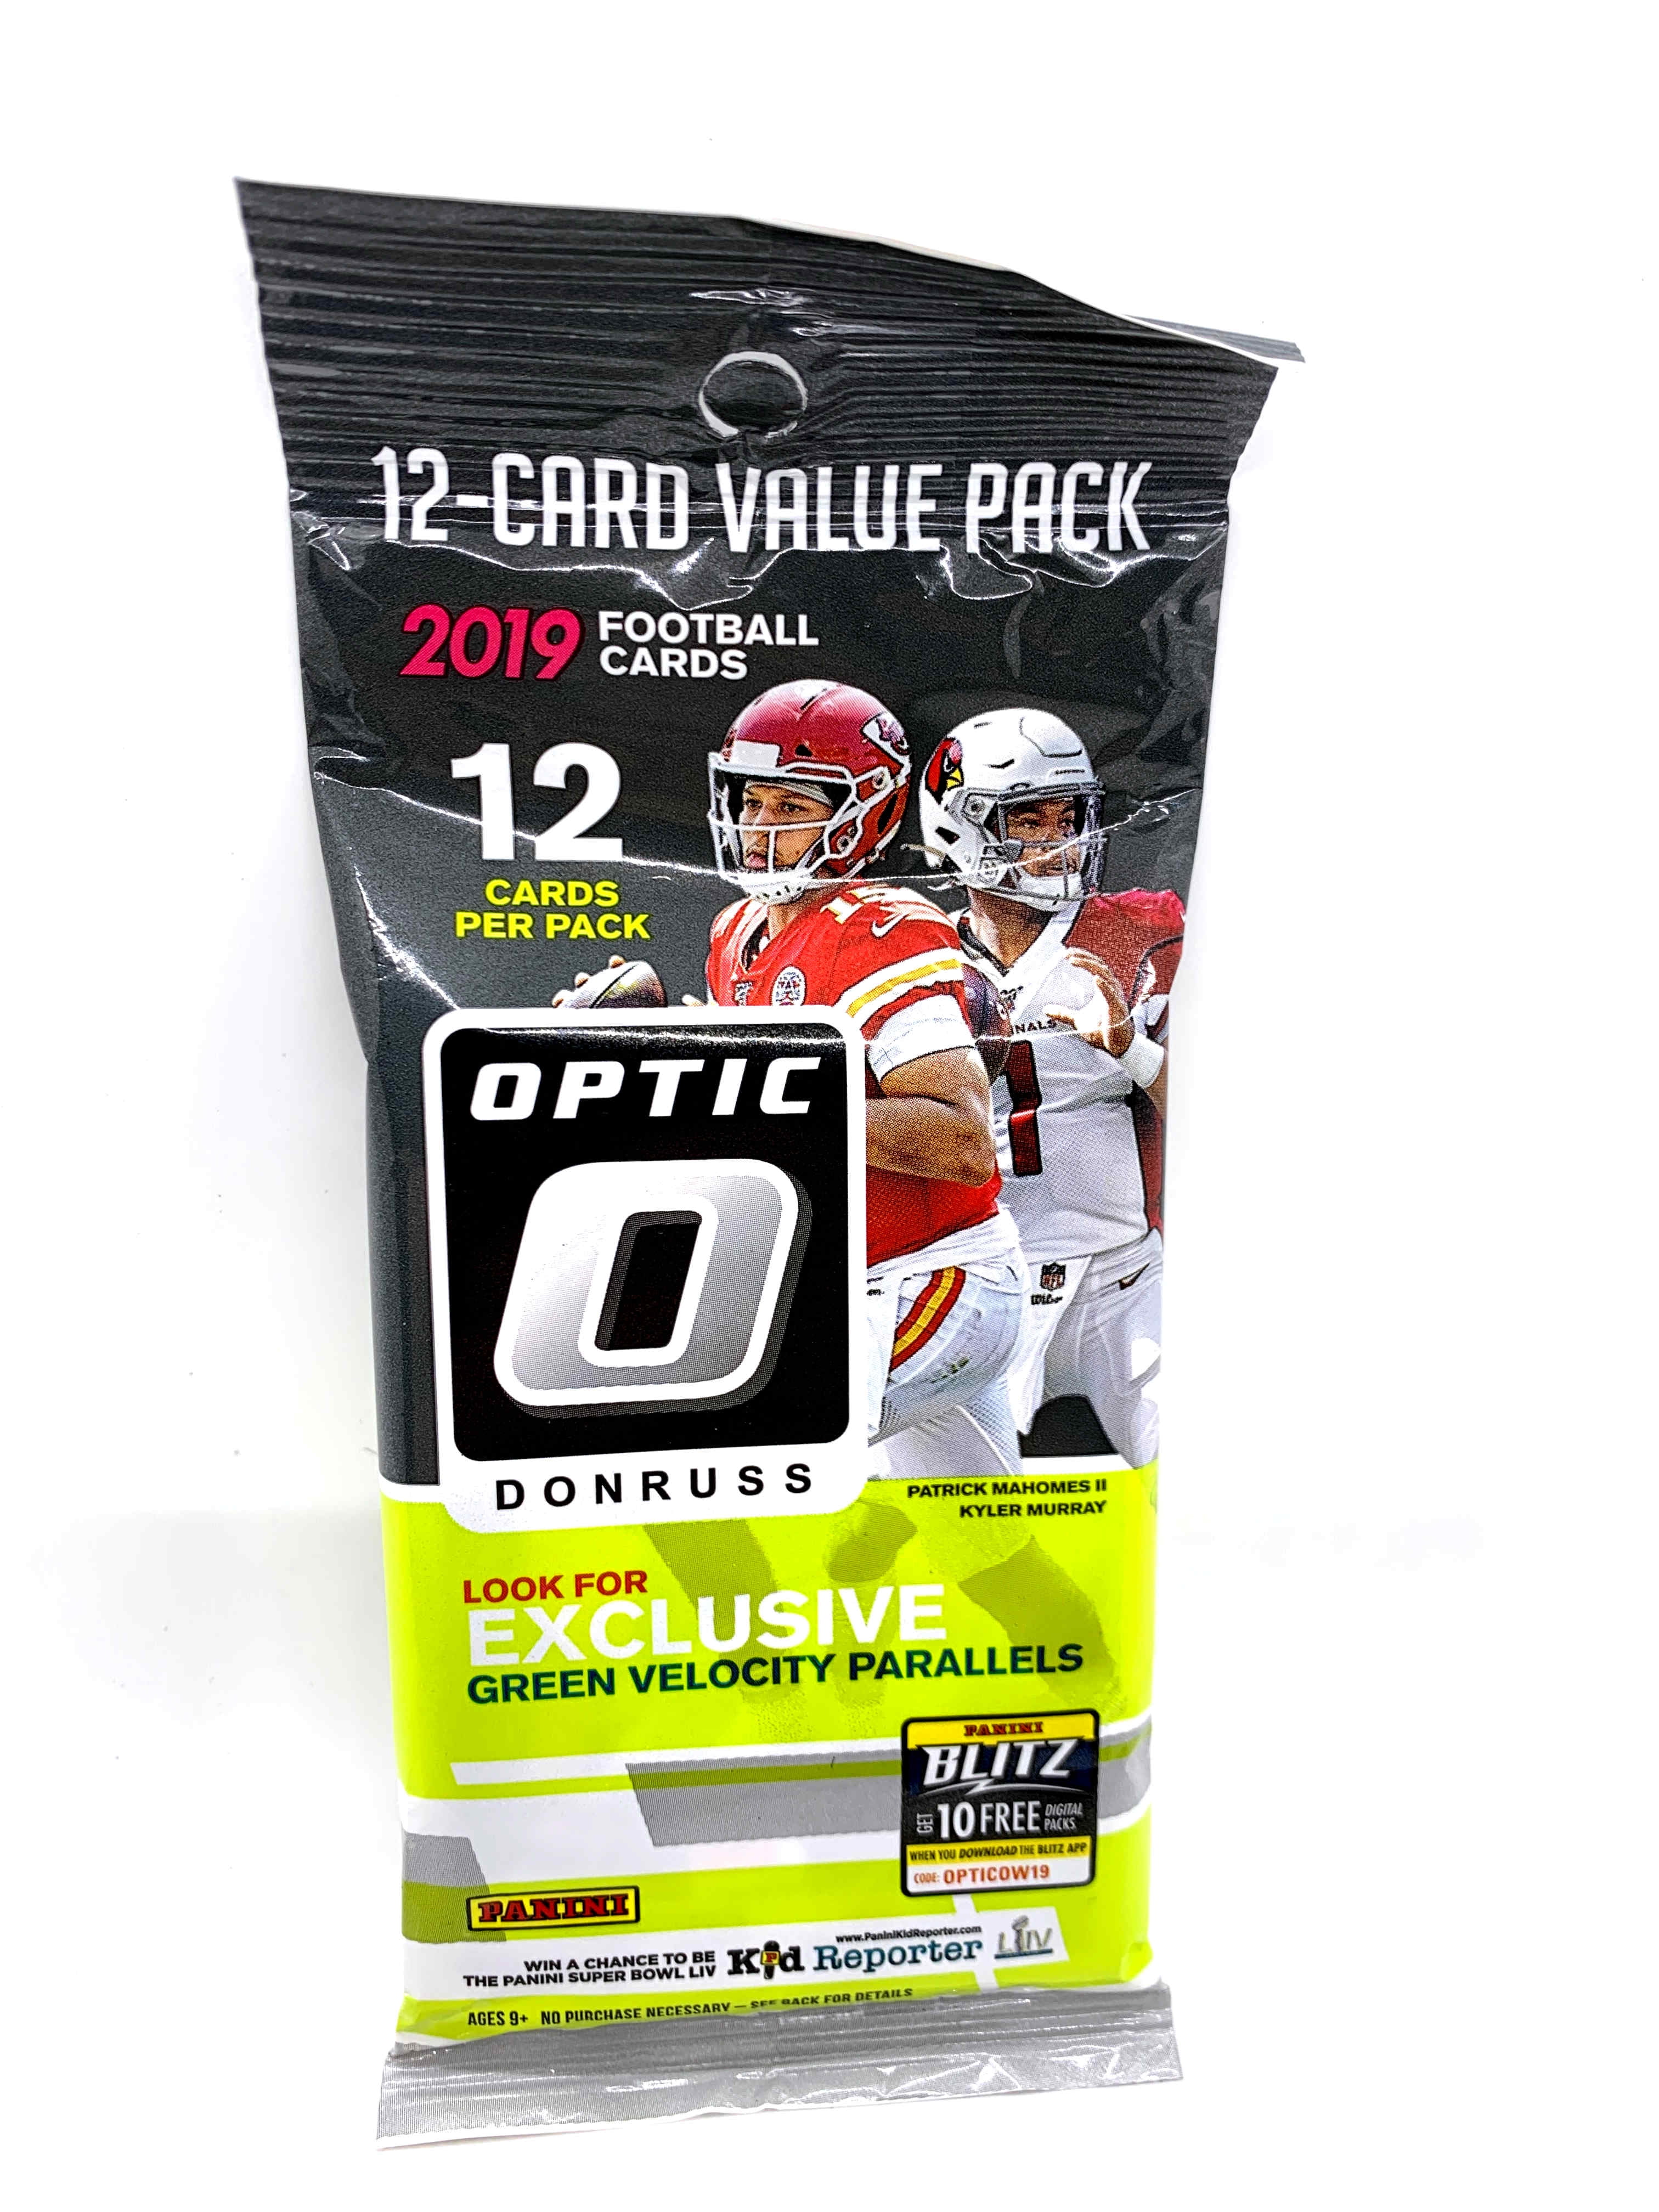 2019 0PTIC FOOTBALL 12 CARD PACK NEW LOOK FOR GREEN VELOCITY PARALLELS 